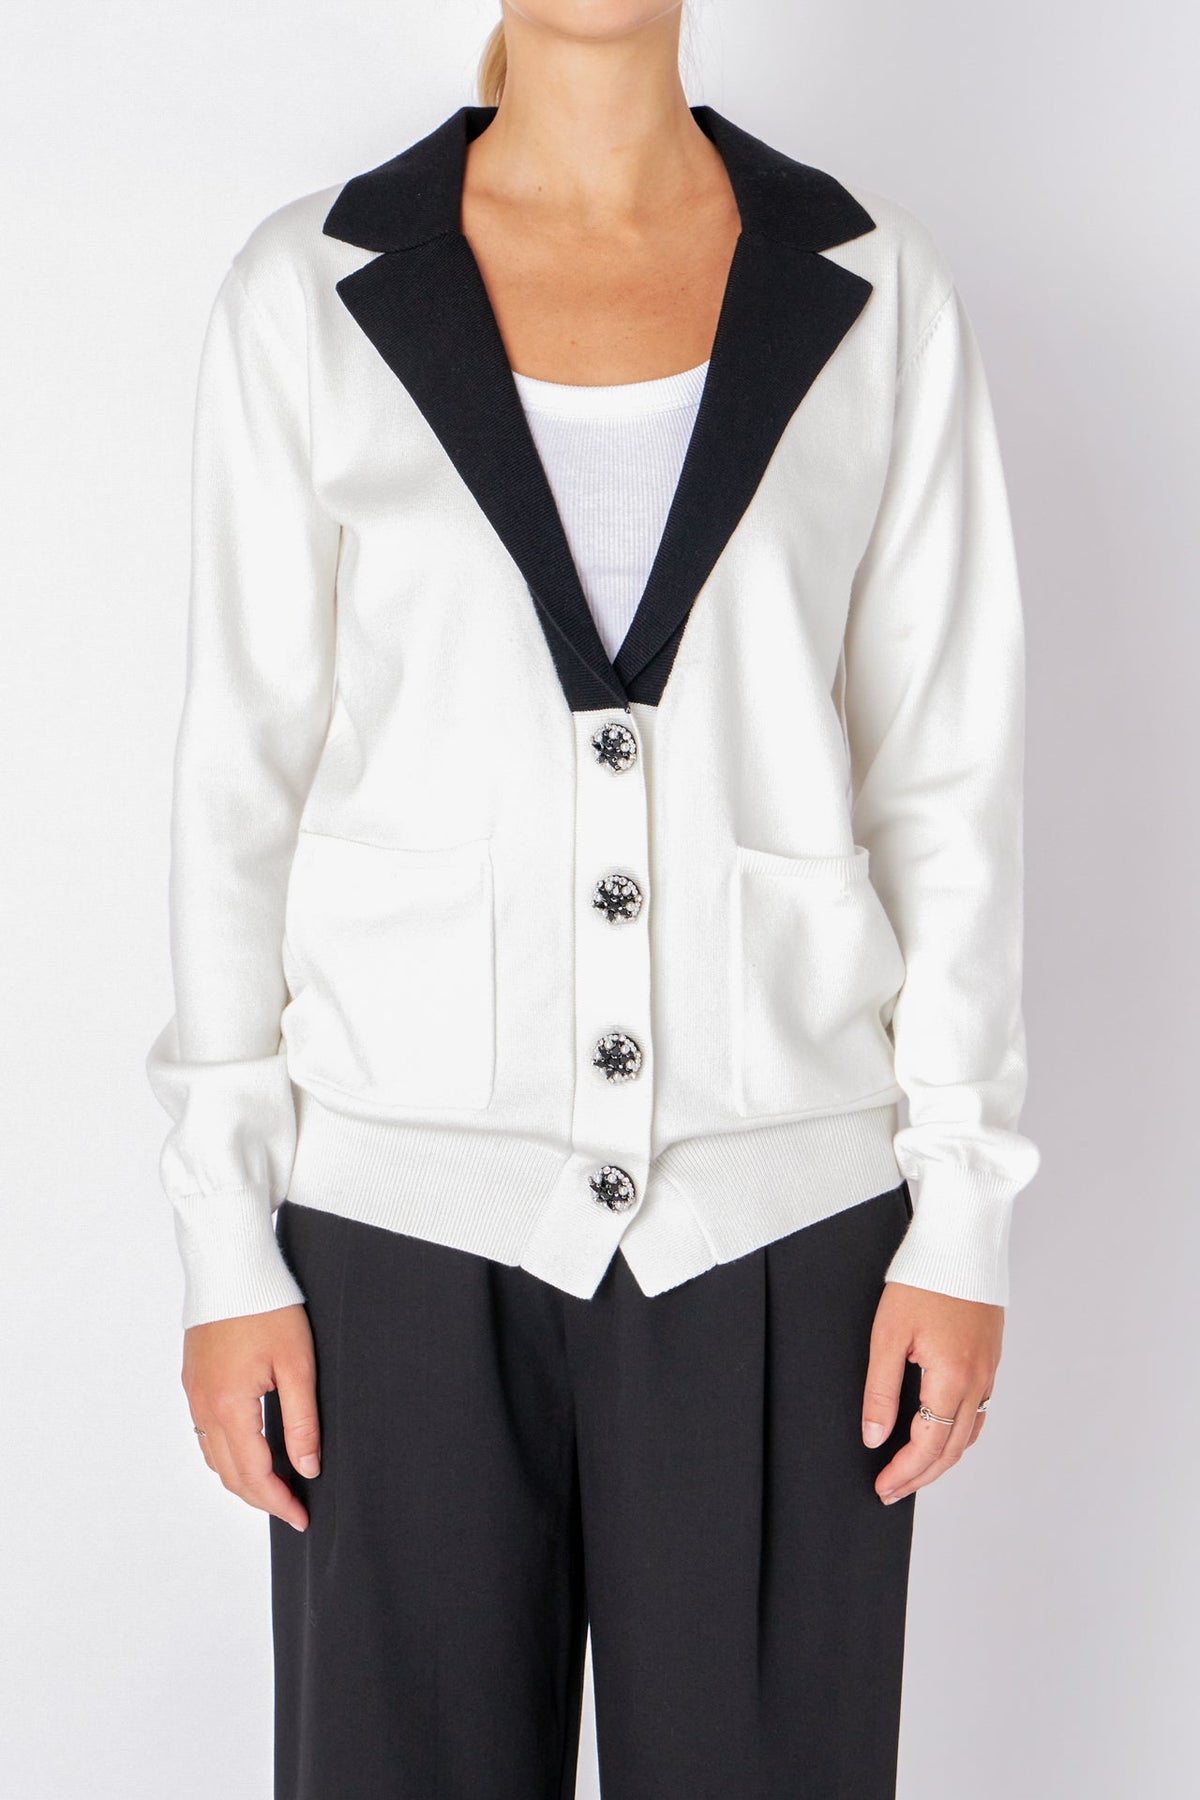 ENDLESS ROSE - Premium Jewel Knit Blazer Cardigan - CARDIGANS available at Objectrare